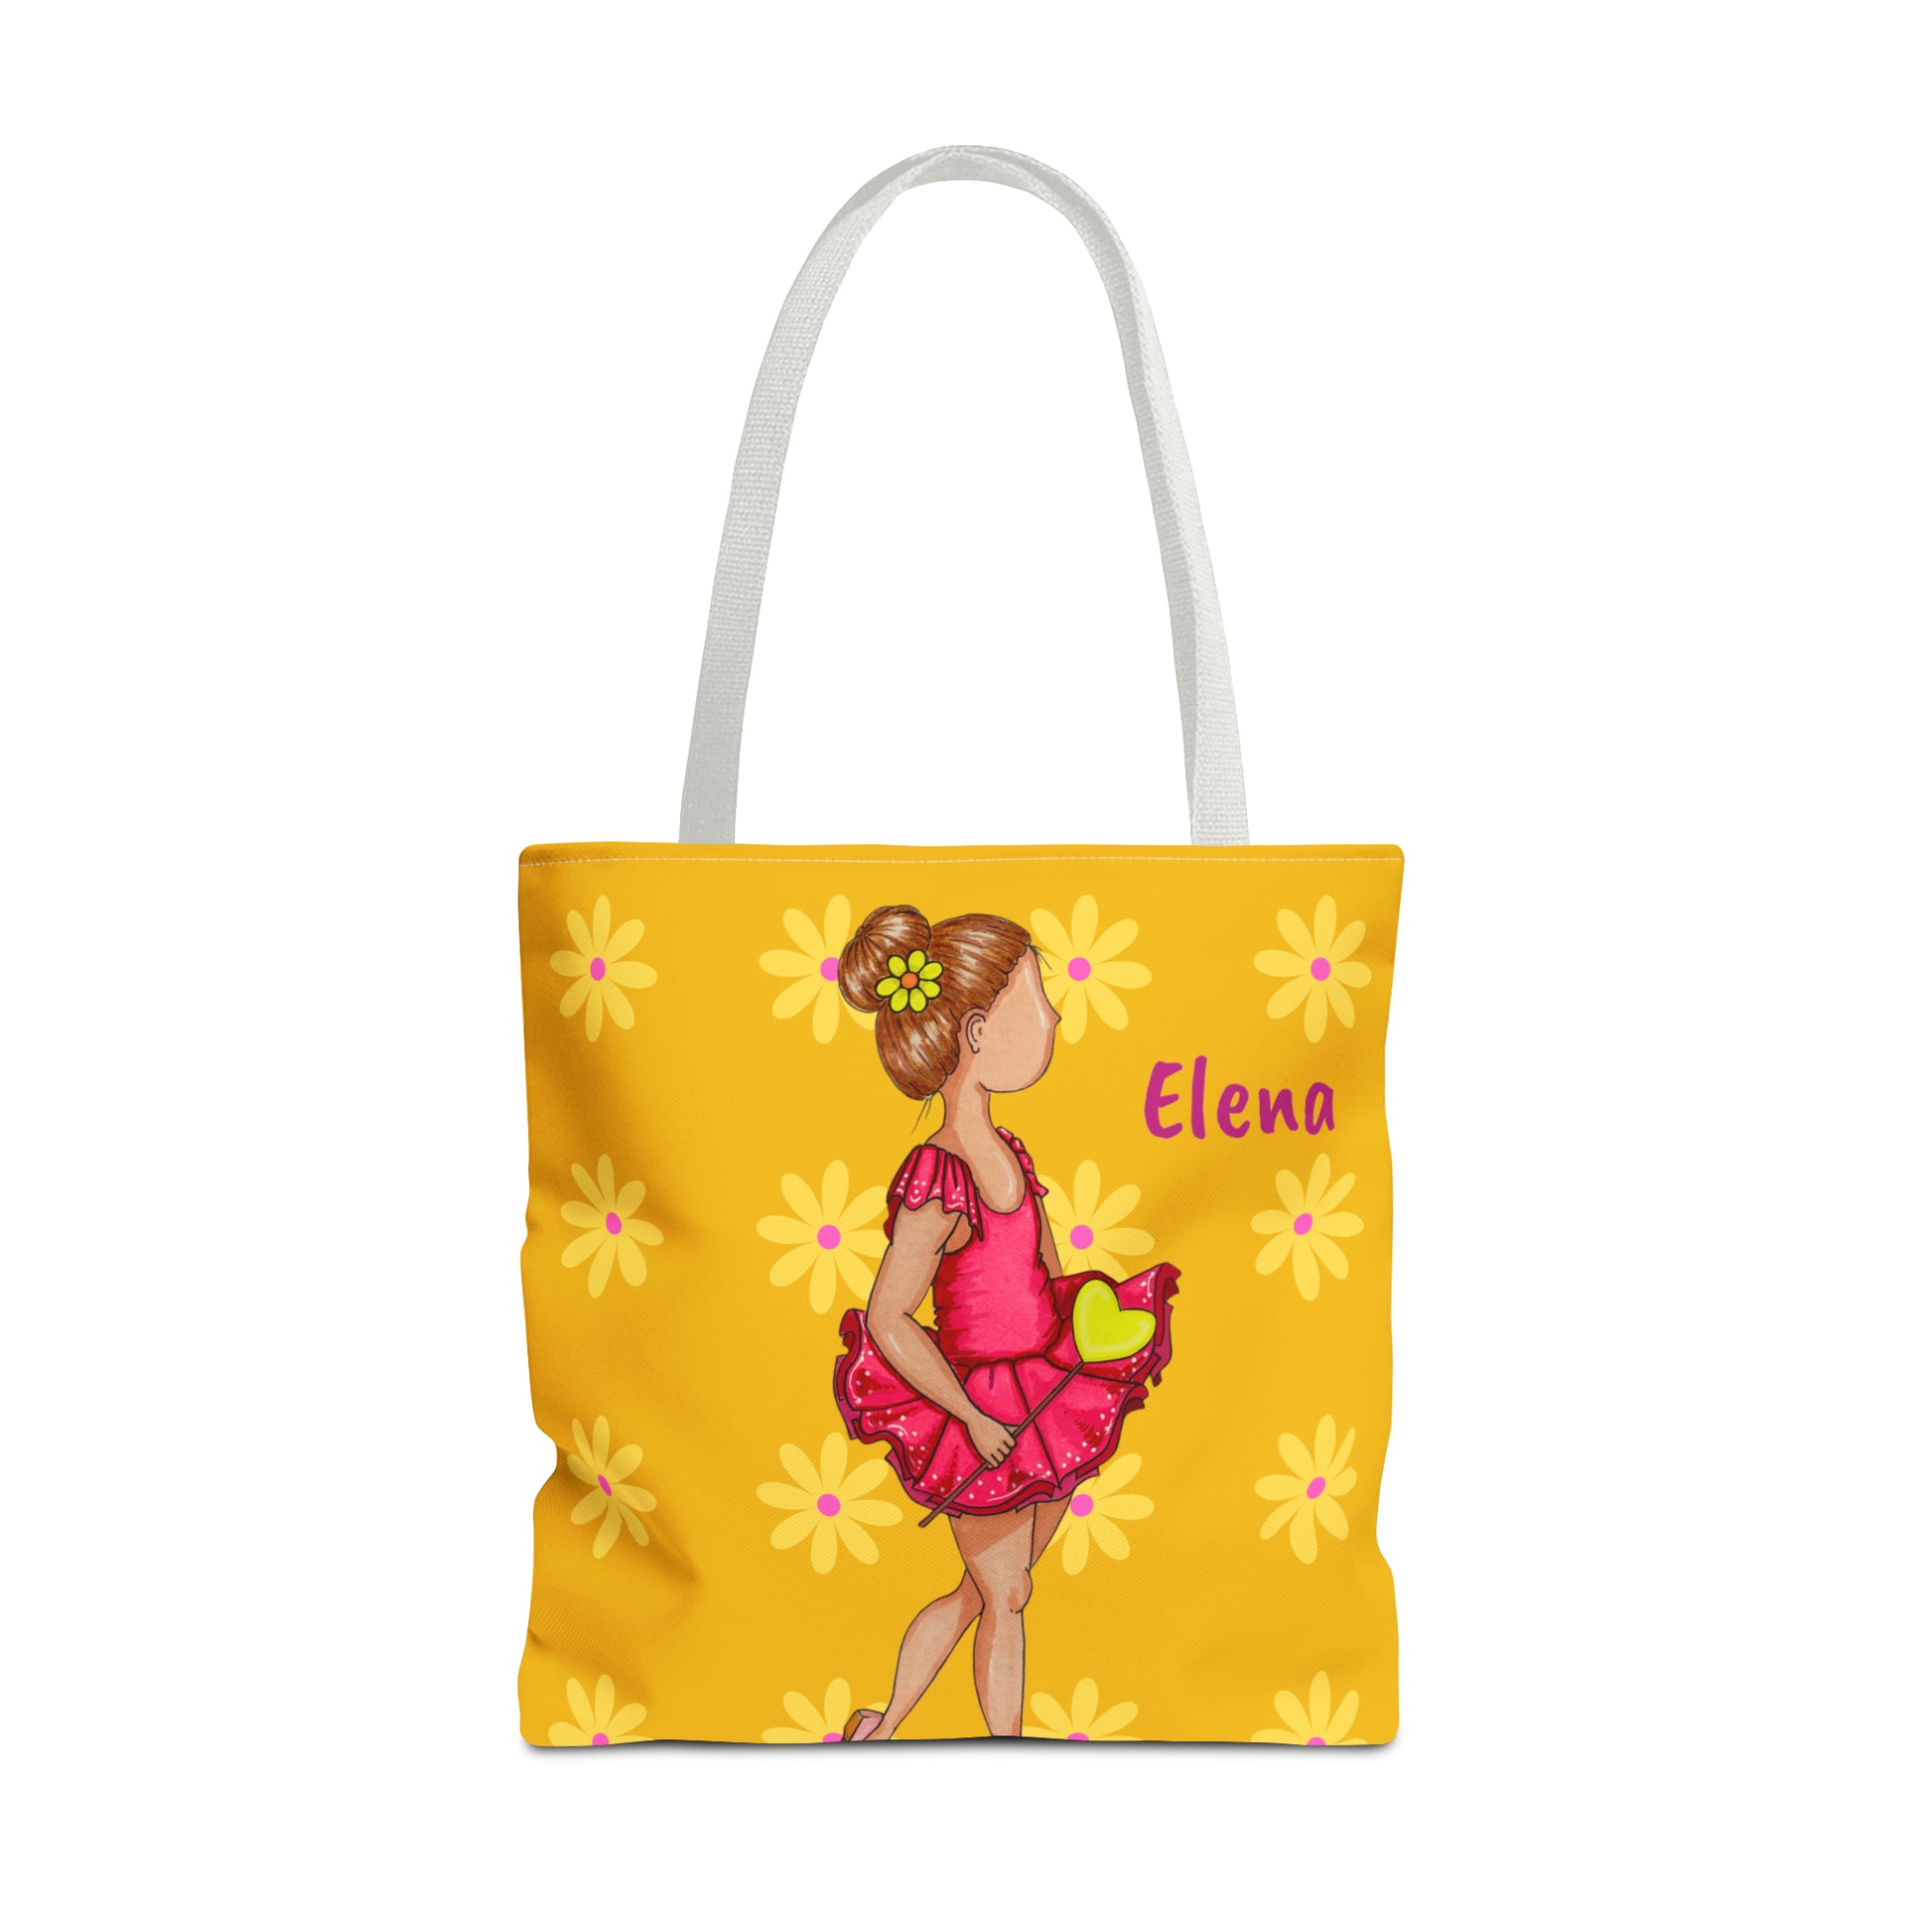 a yellow tote bag with a girl in a pink dress holding a green apple